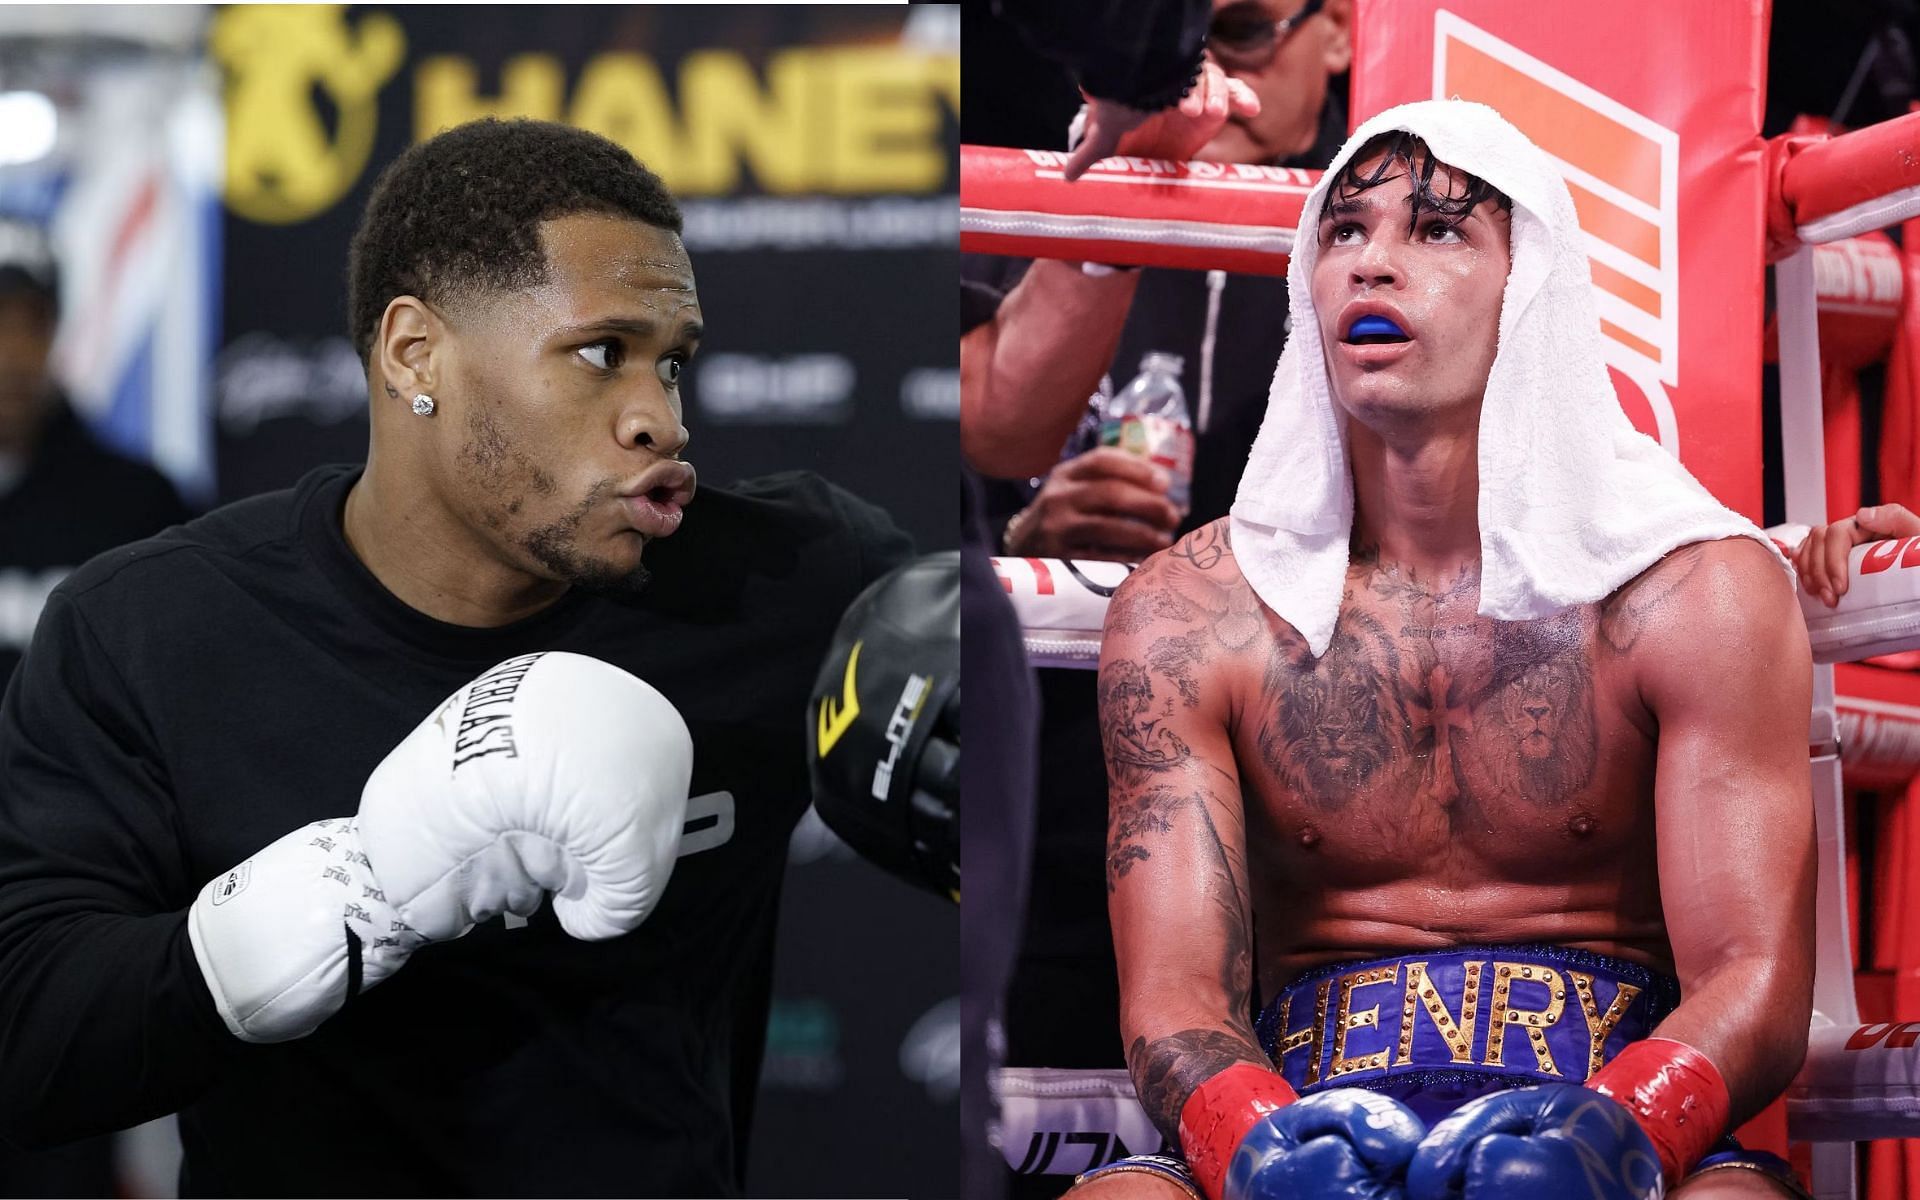 Ryan Garcia (right) predicted to quit on the stool against Devin Haney (left) [Images Courtesy: @GettyImages]